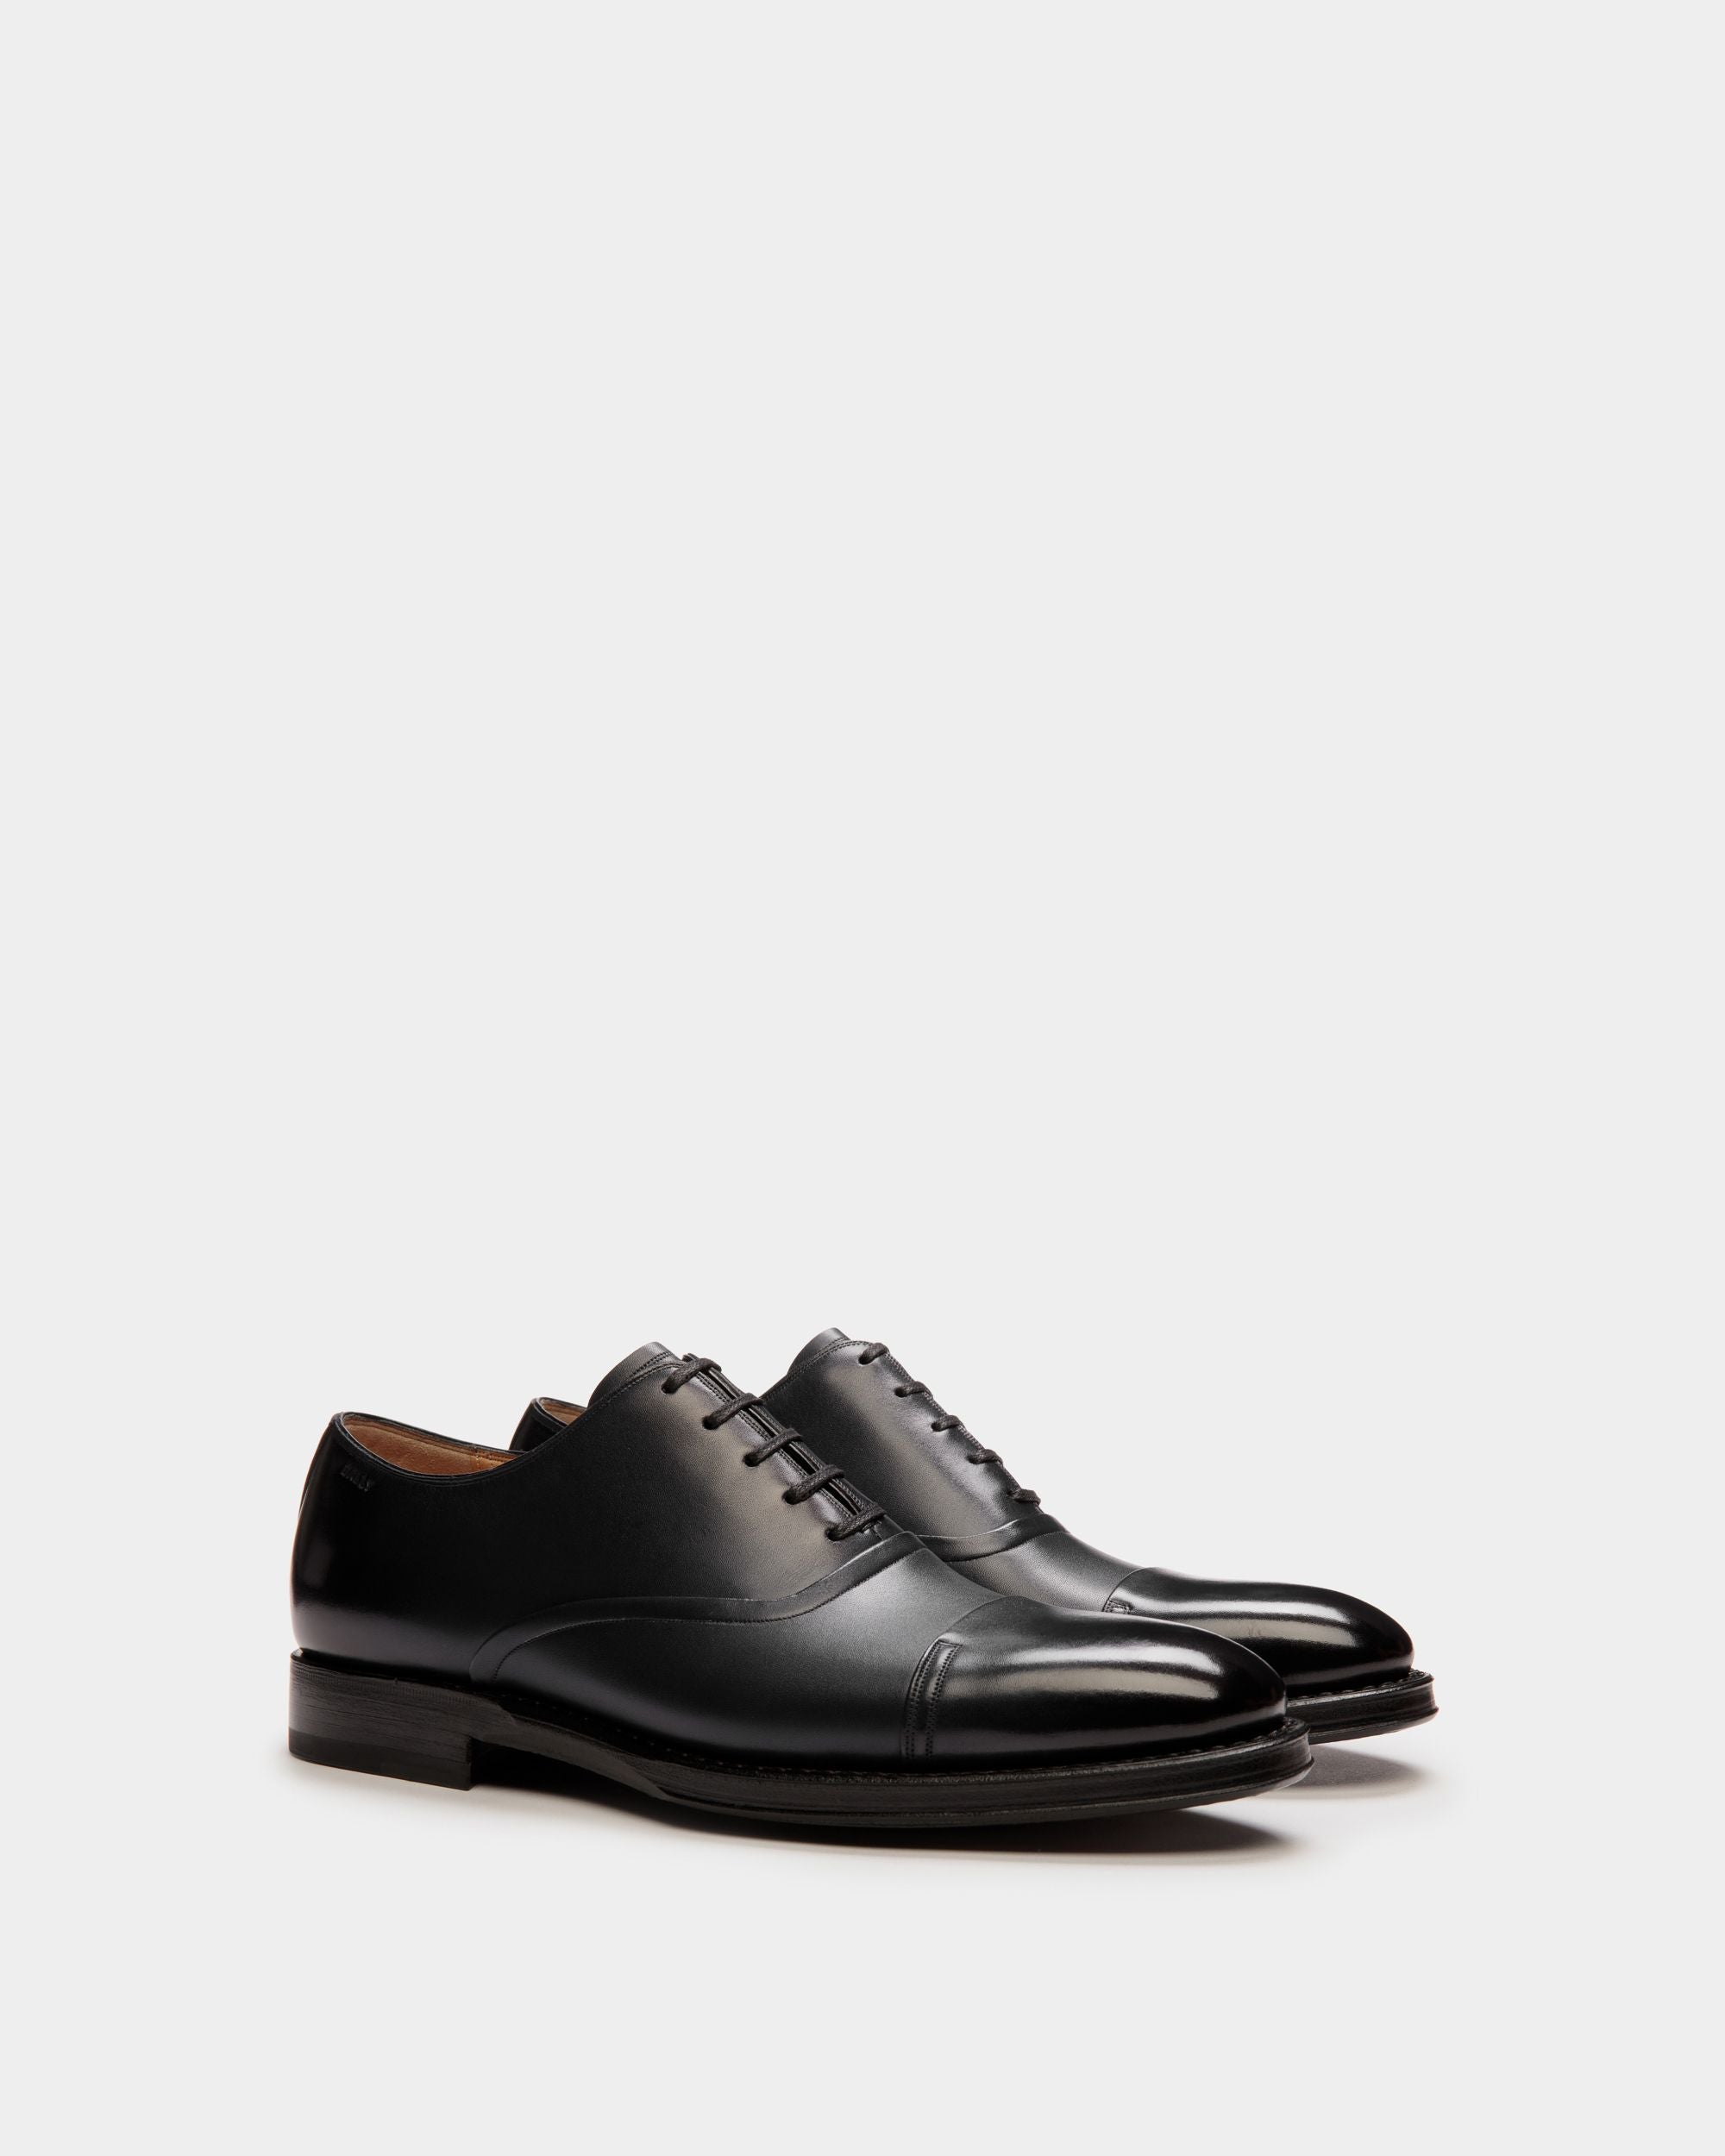 Scribe Un | Women's Oxford in Black Leather | Bally | Still Life 3/4 Front